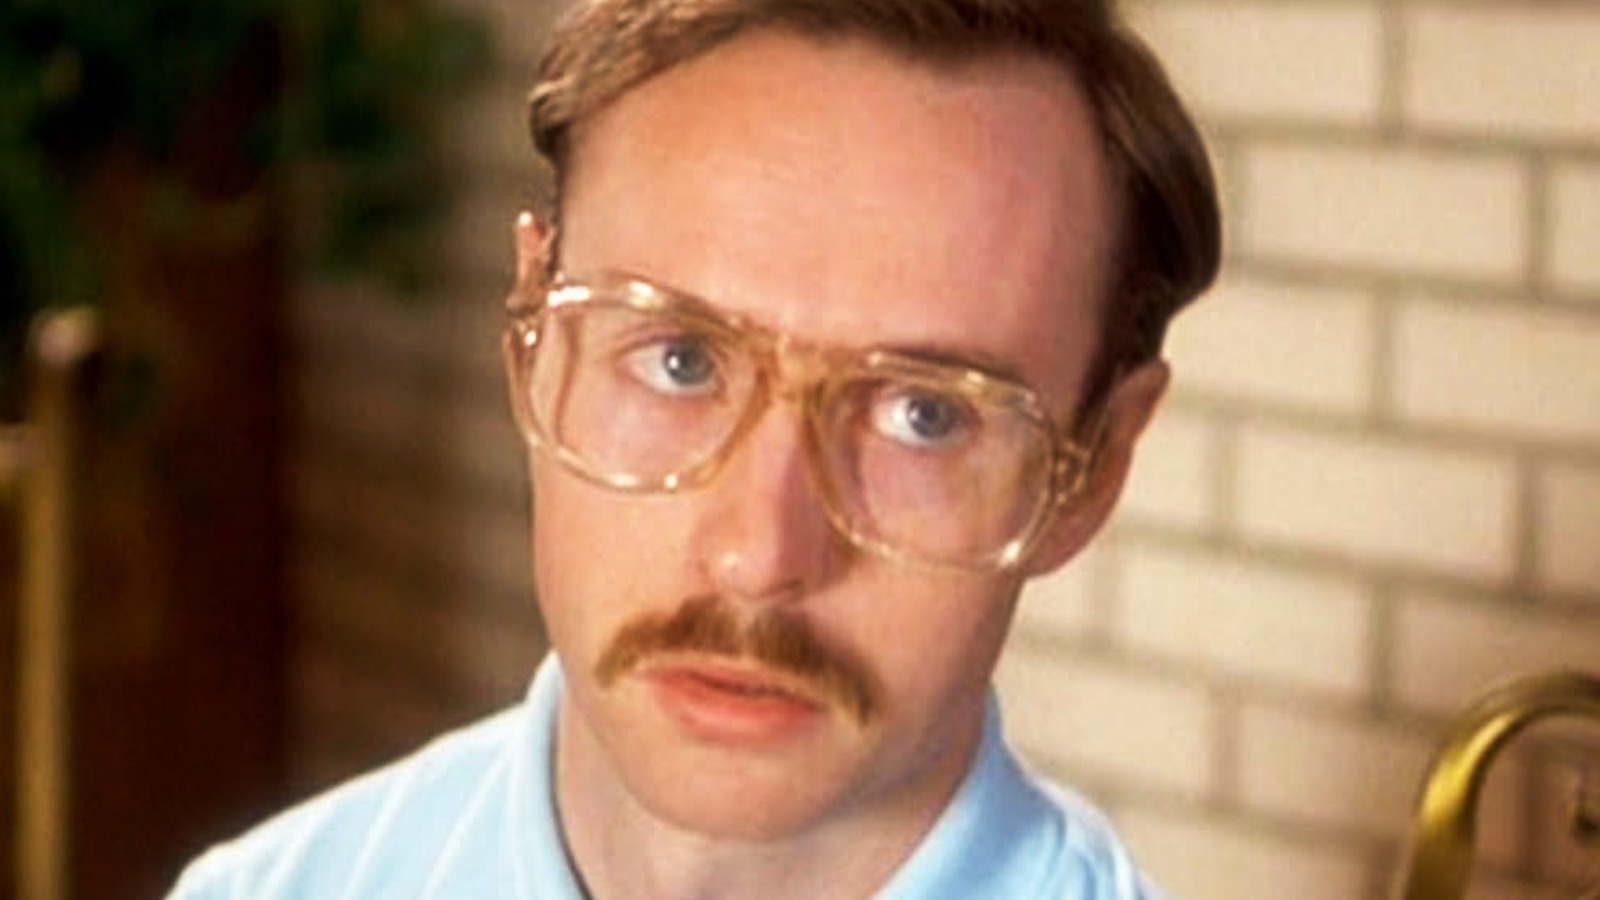 Whatever Happened To The Actor That Played Kip In Napoleon Dynamite?